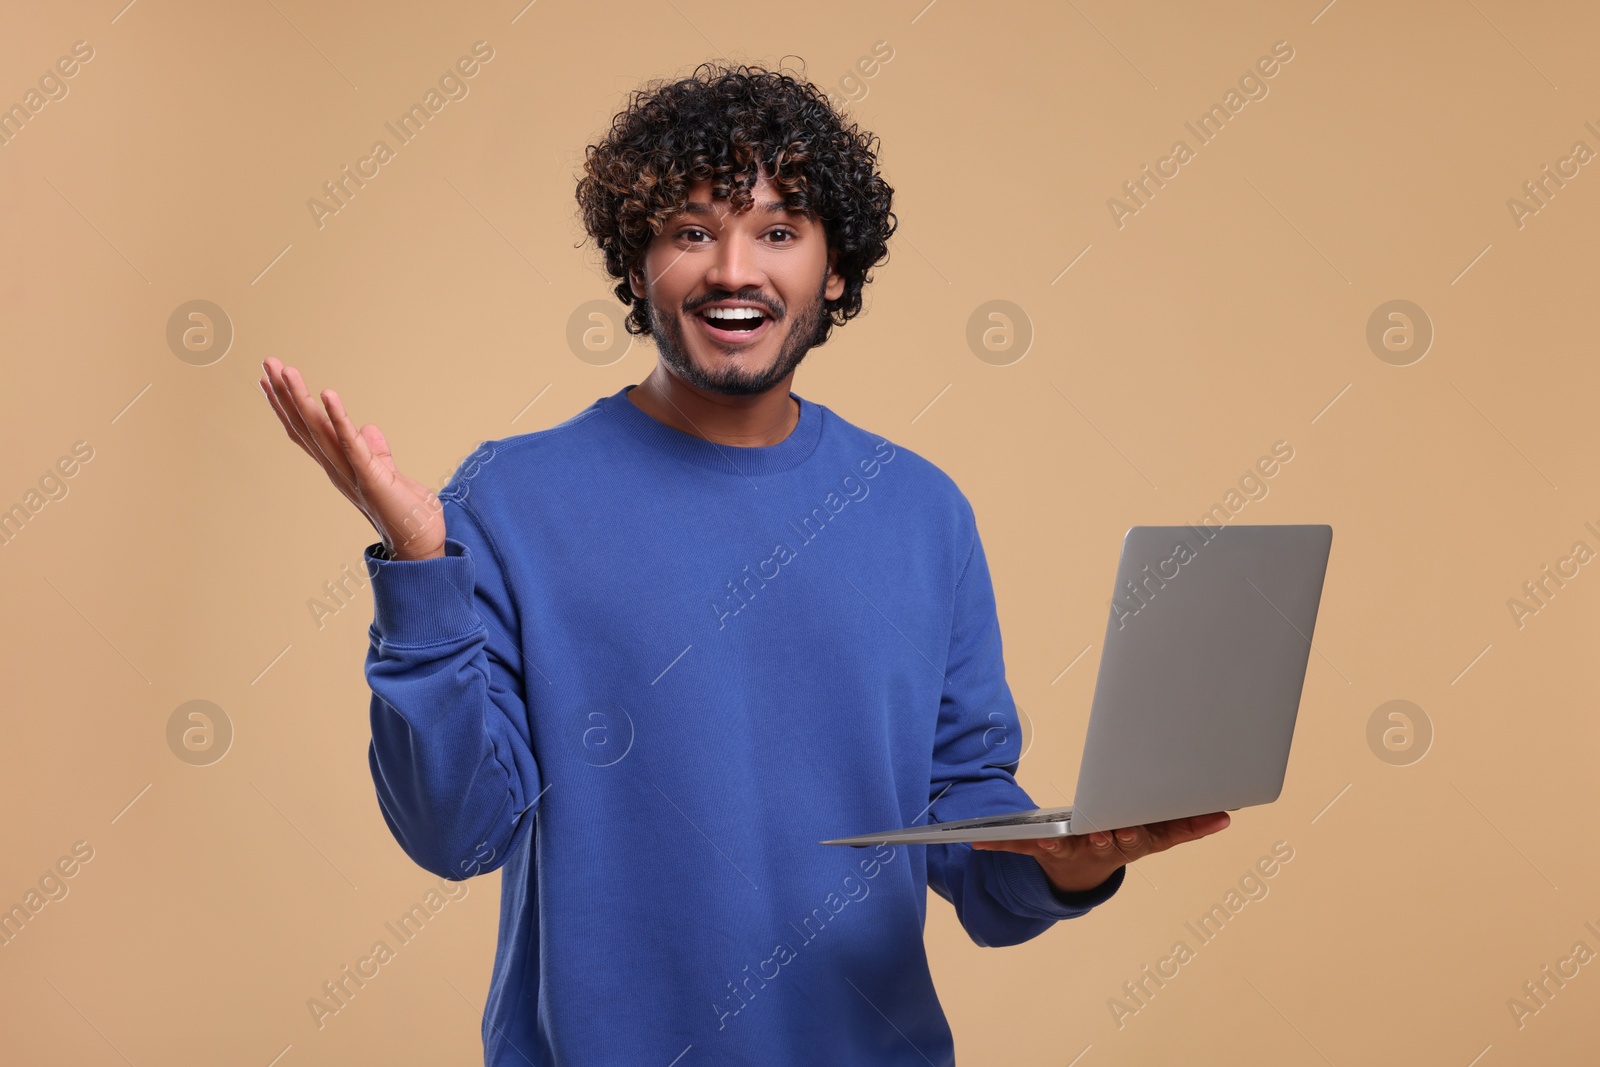 Photo of Smiling man with laptop on beige background